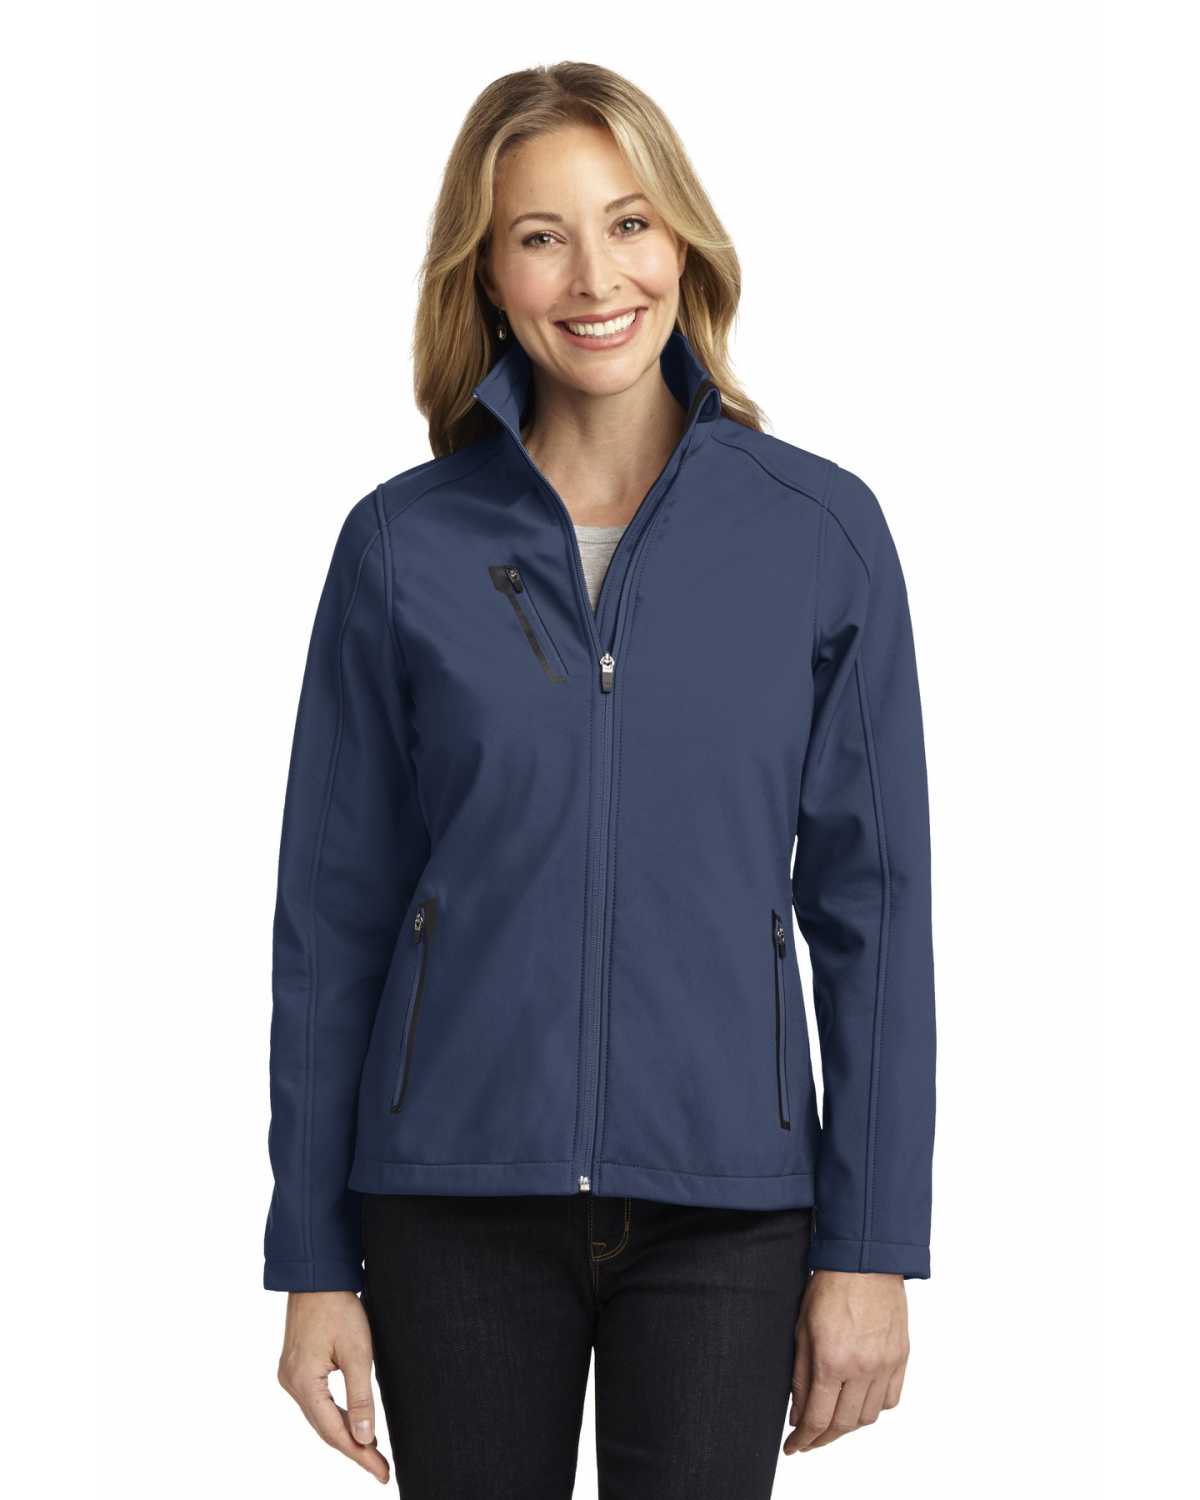 Port Authority L324 Ladies Welded Soft Shell Jacket on discount ...